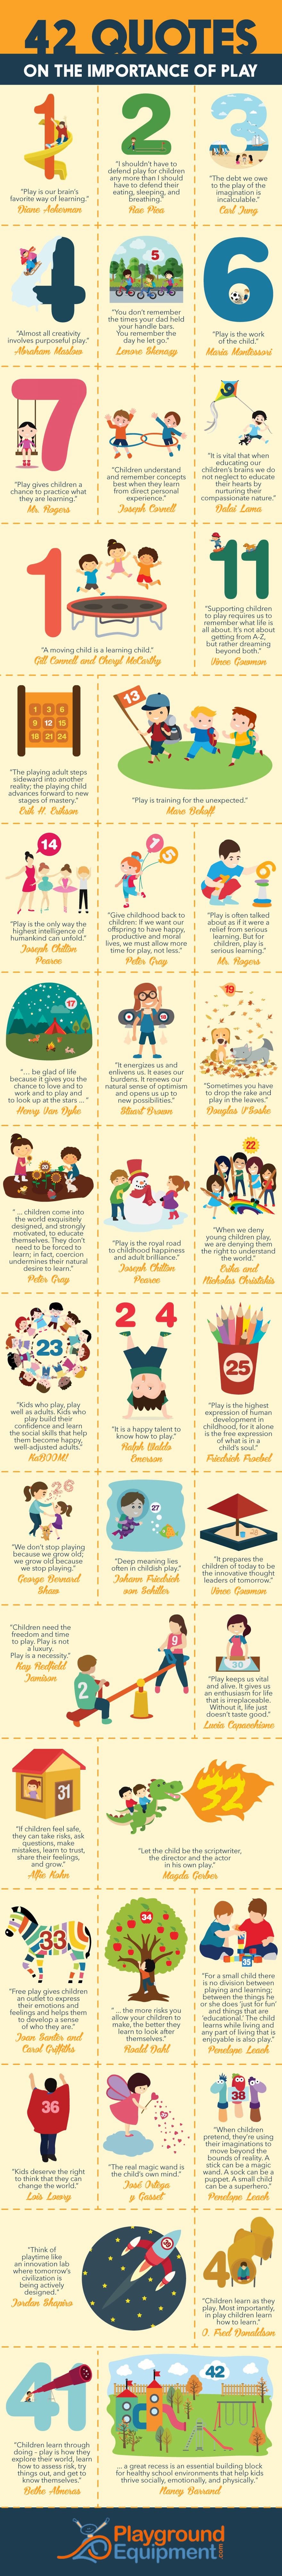 42 Quotes On The Importance Of Play!